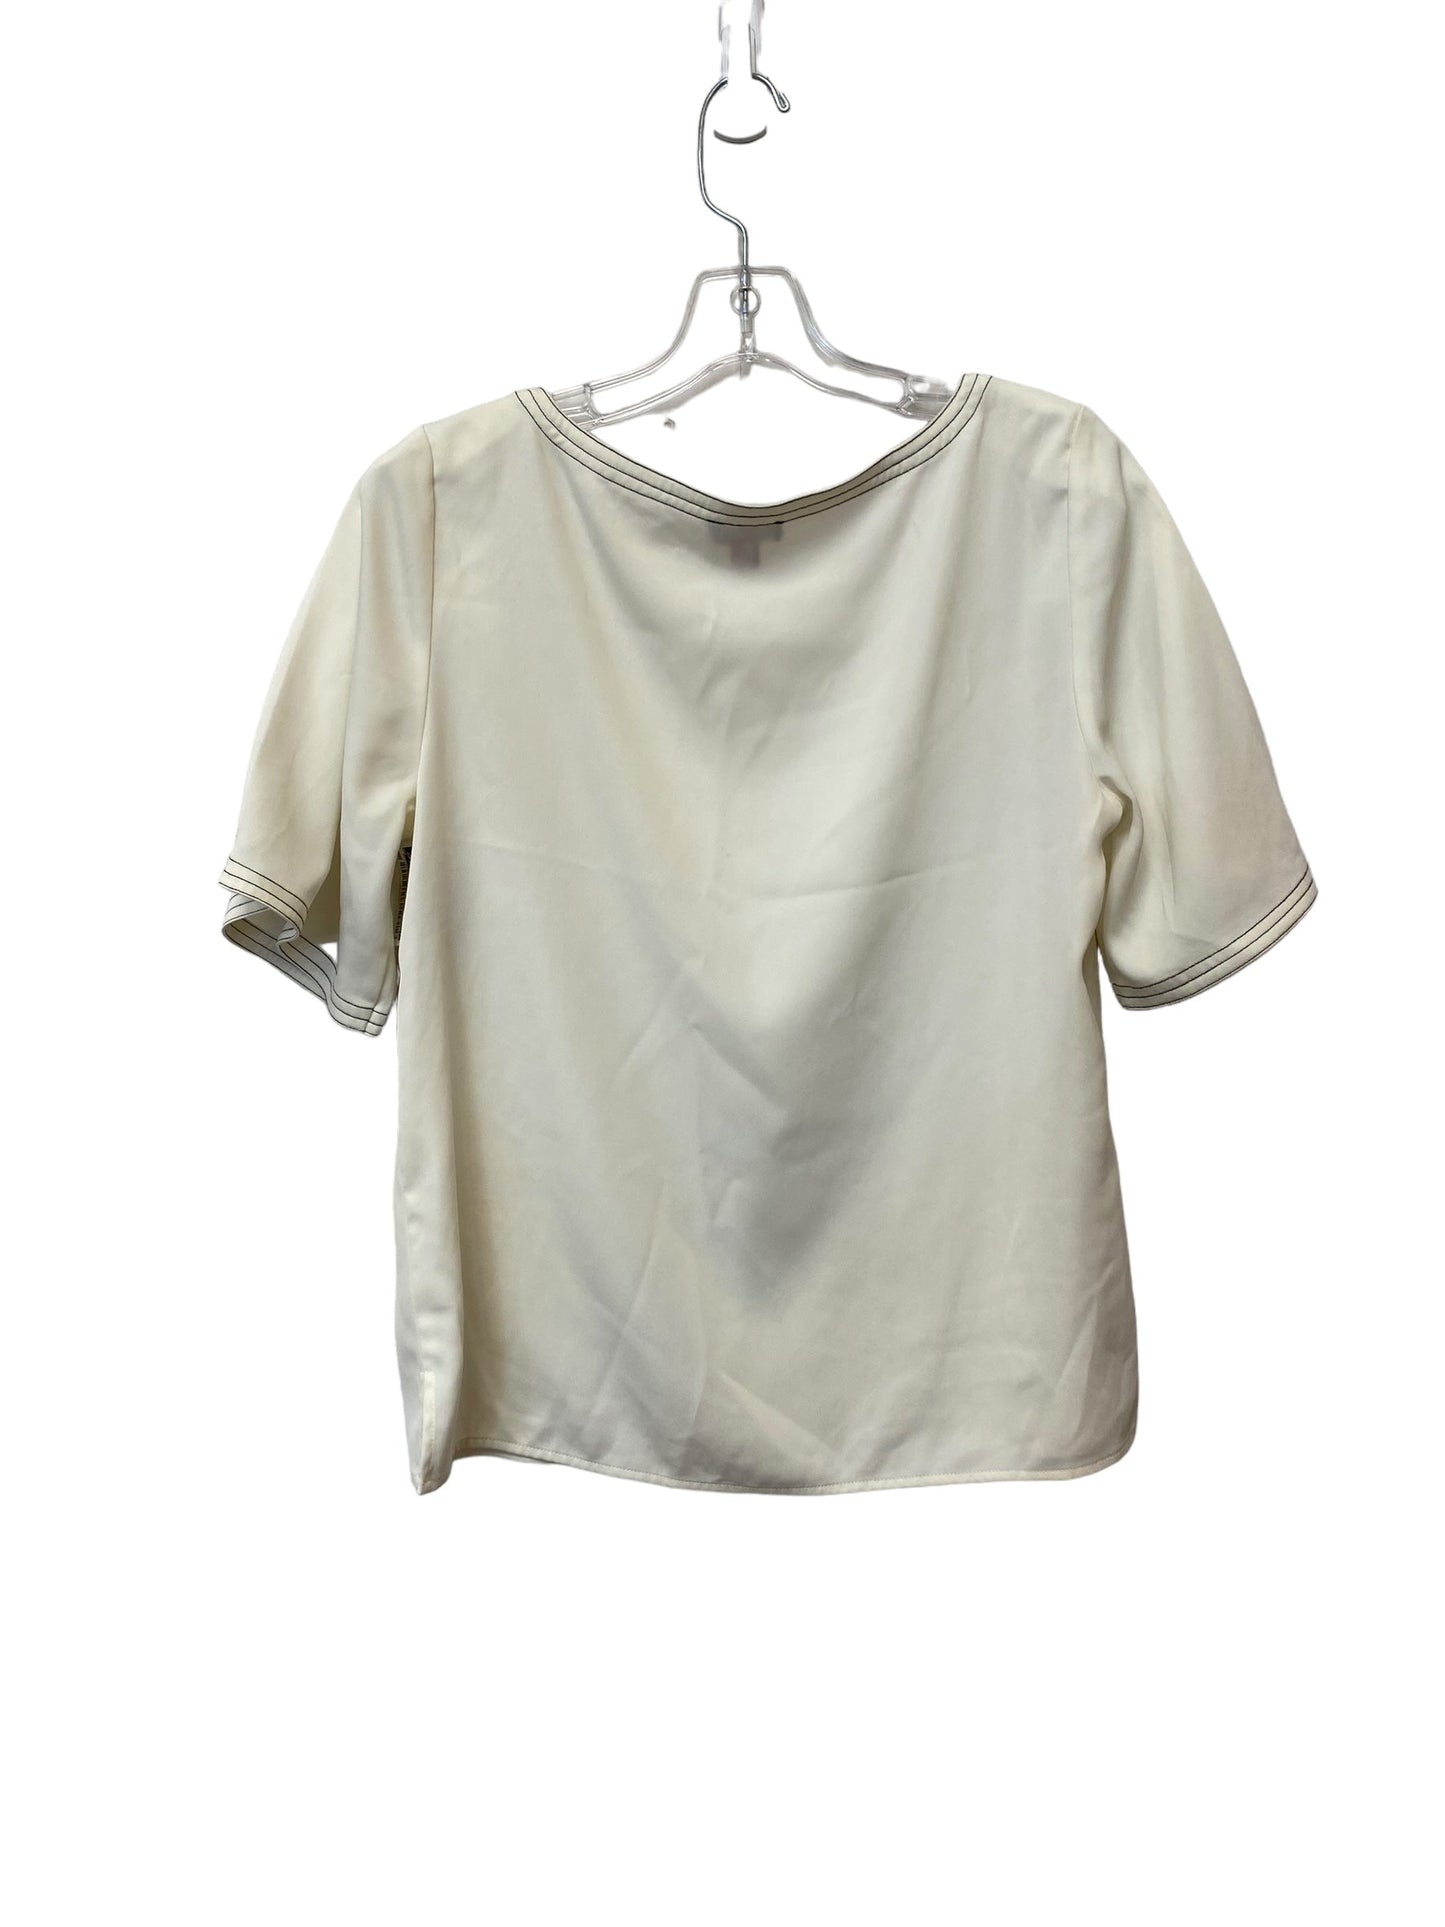 Cream Top Short Sleeve Vince Camuto, Size M